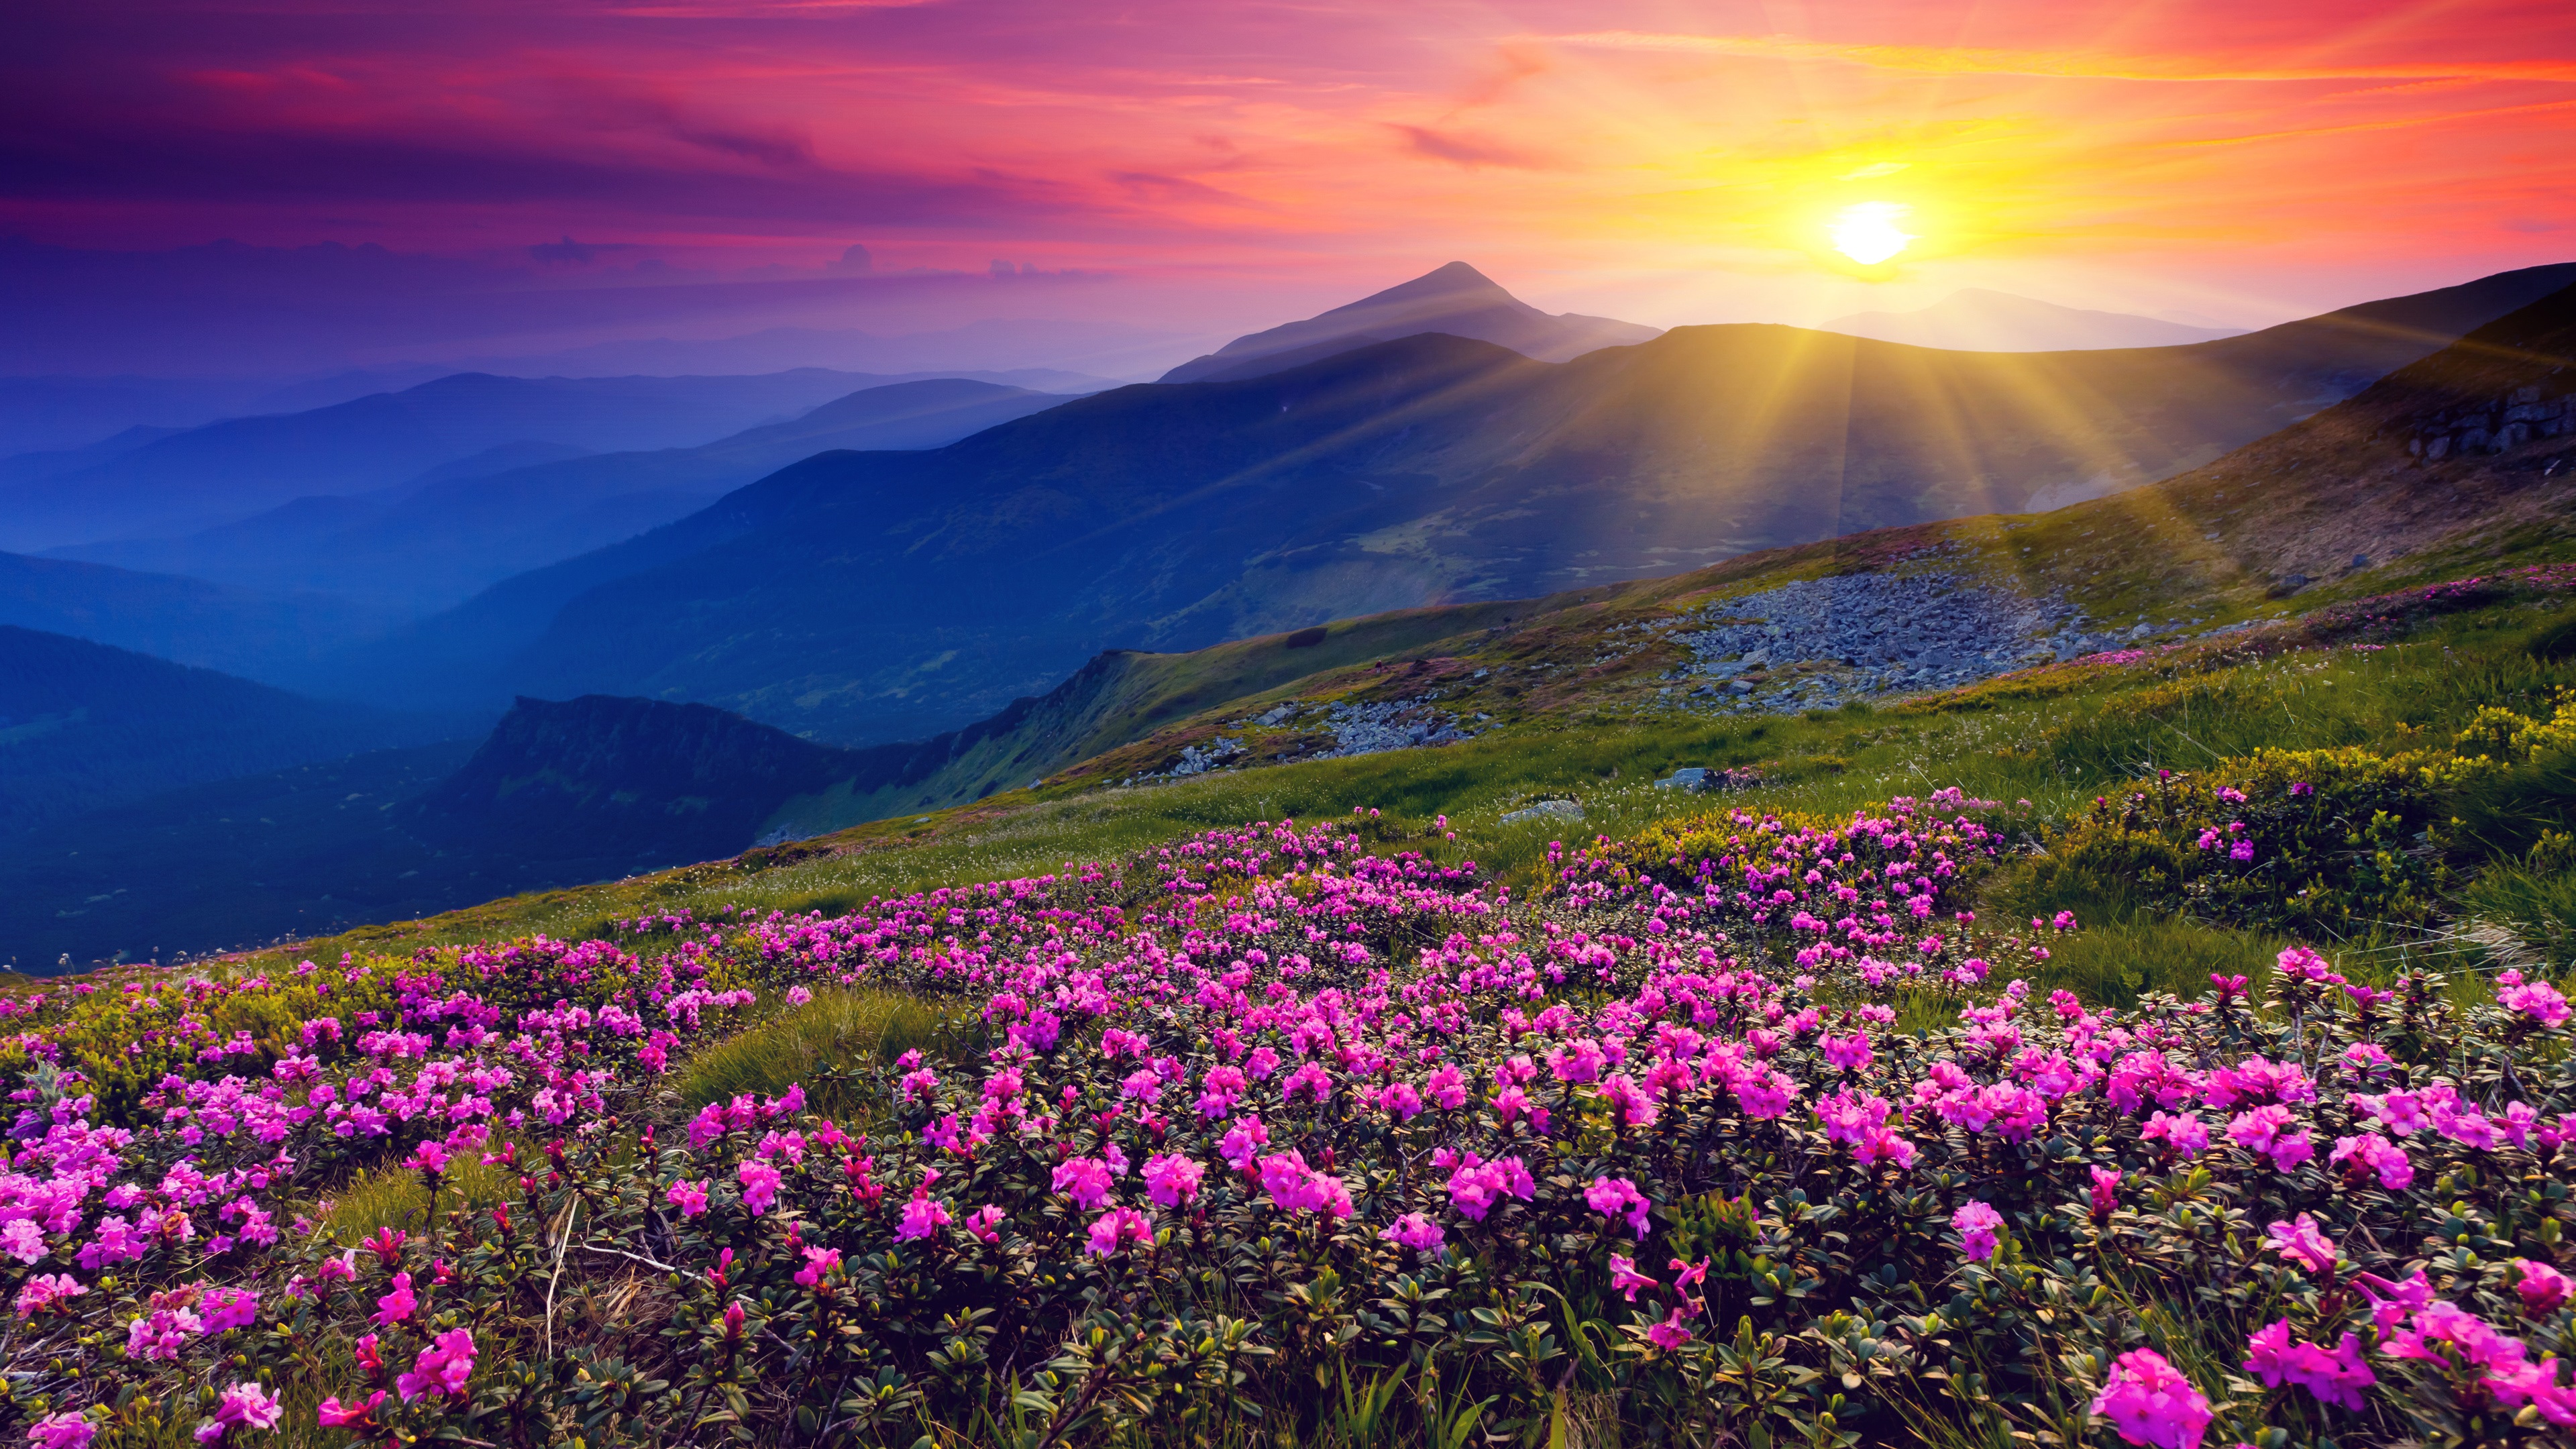 Wallpaper Sunrise, mountains, flowers, grass, dawn 3840x2160 UHD 4K Picture, Image